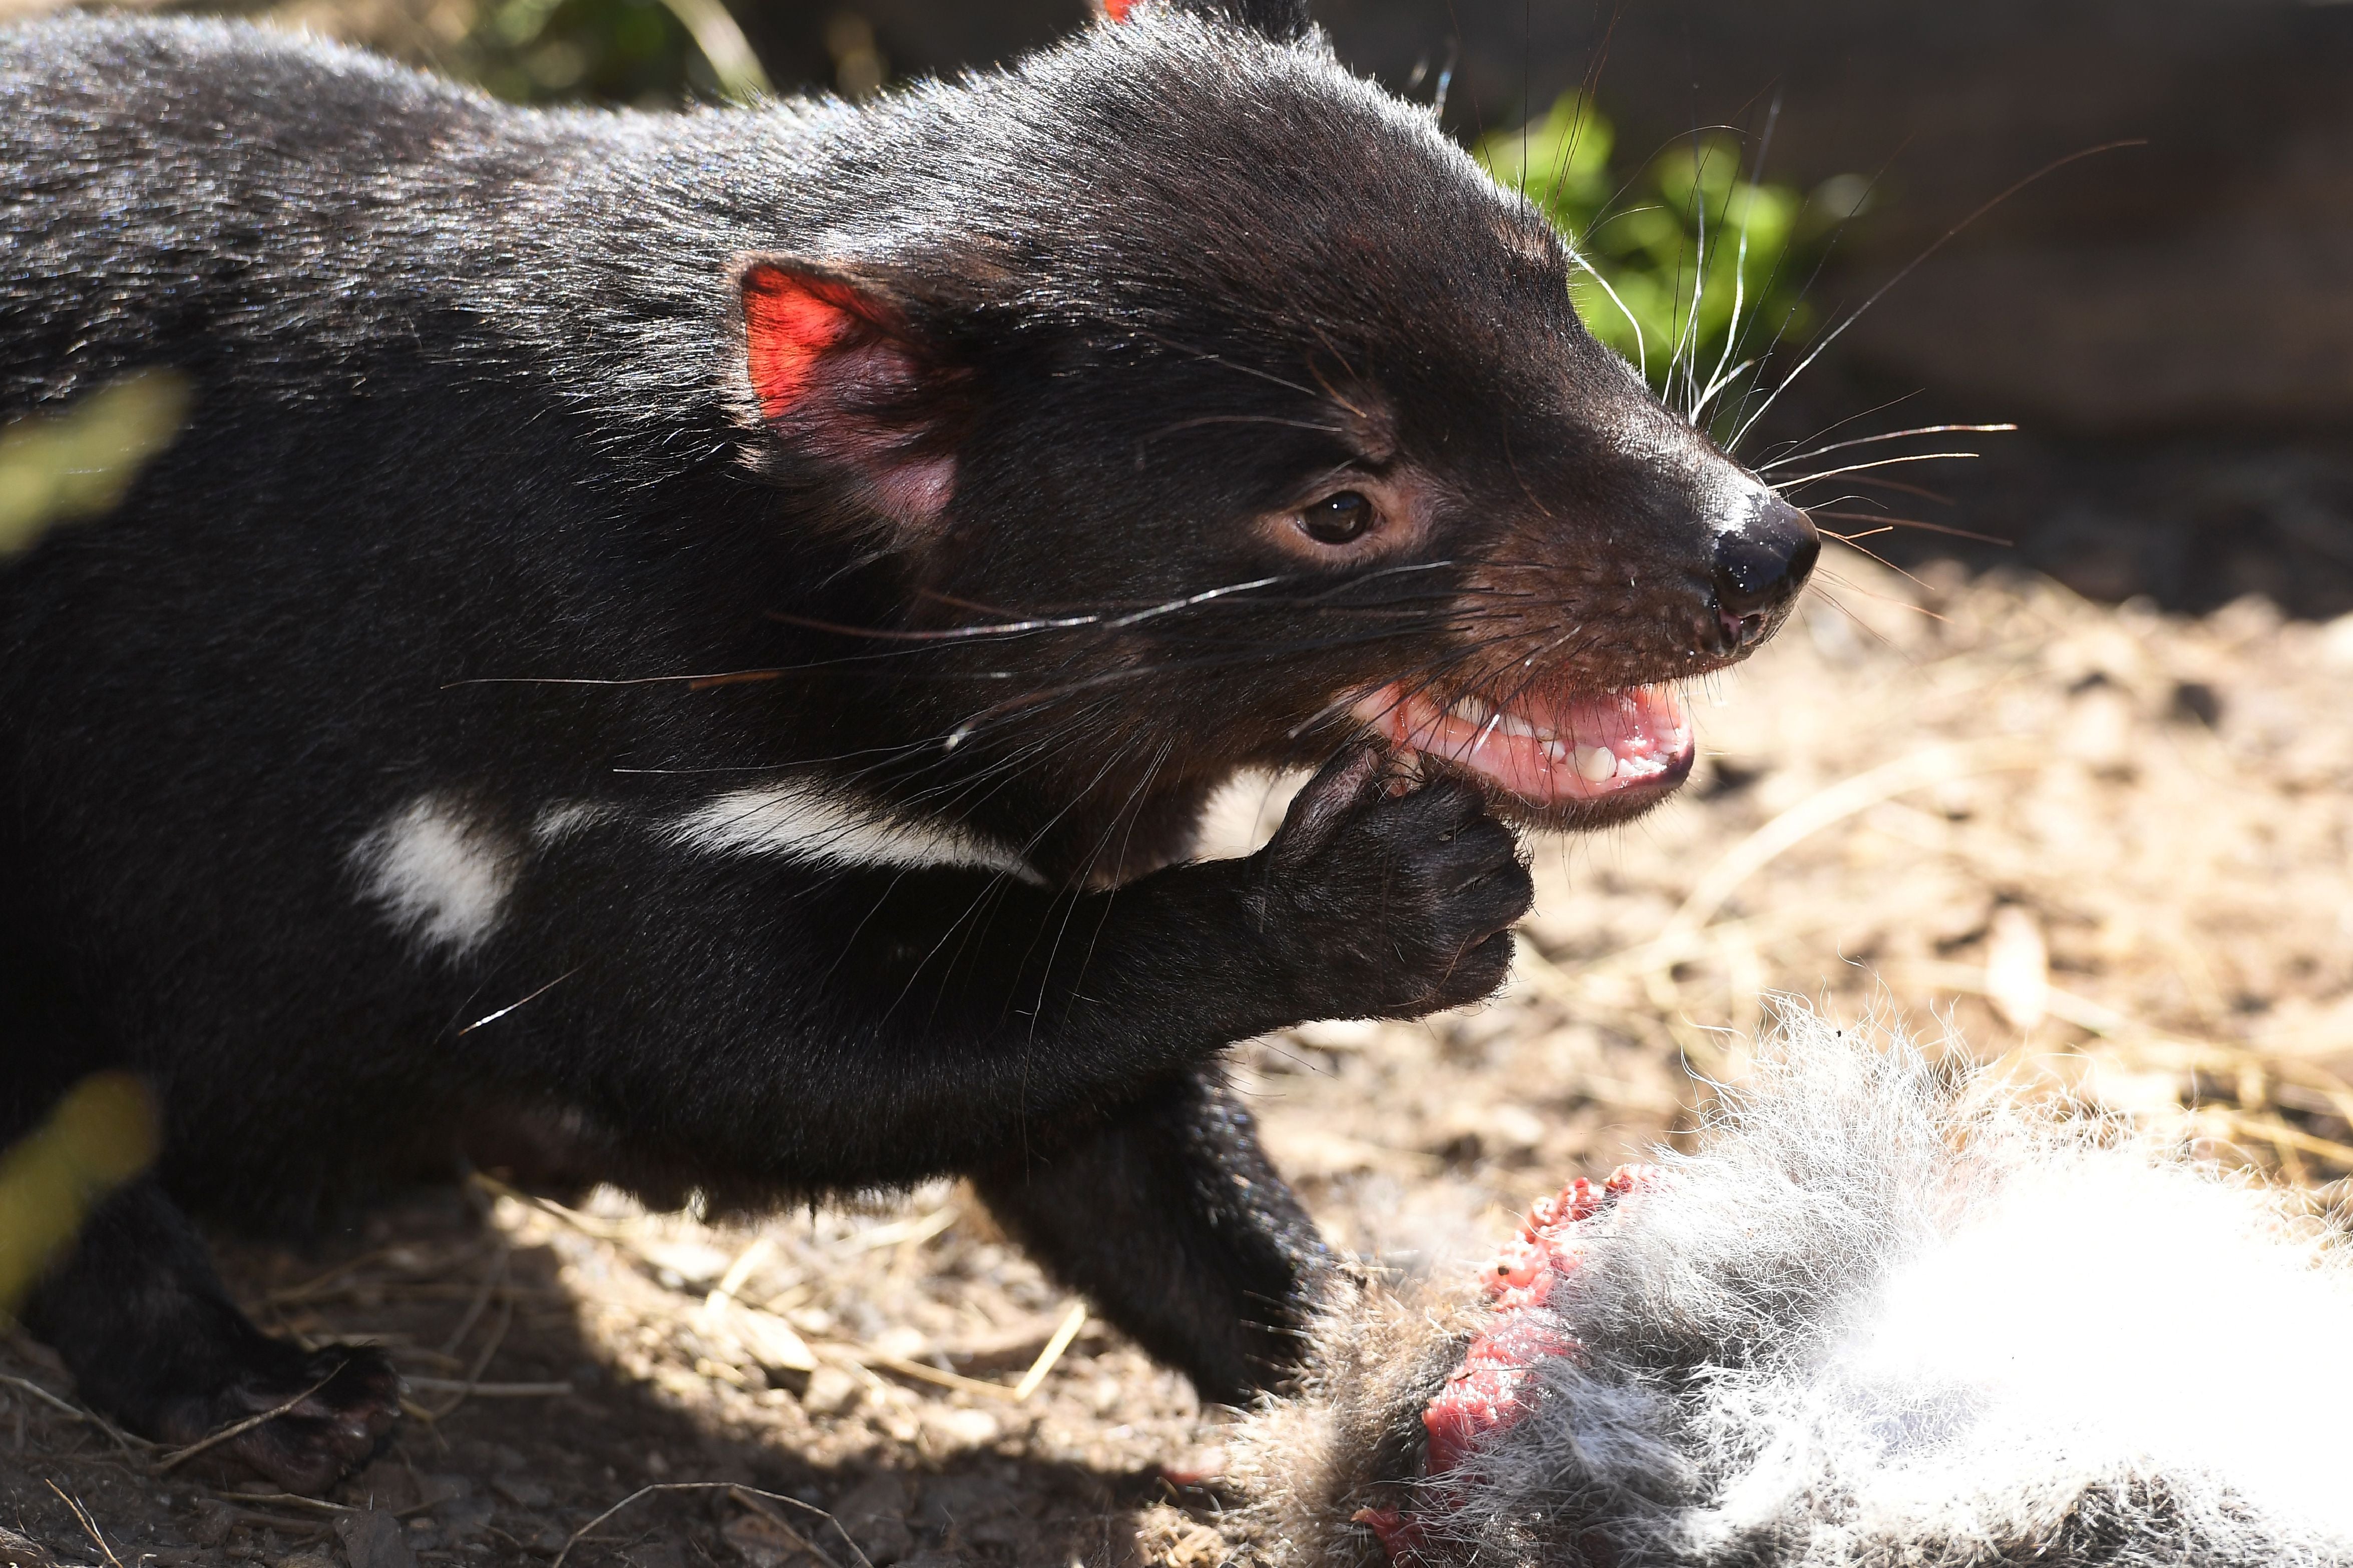 For the first time in 3,000 years, Tasmanian devils were born on the Australian mainland